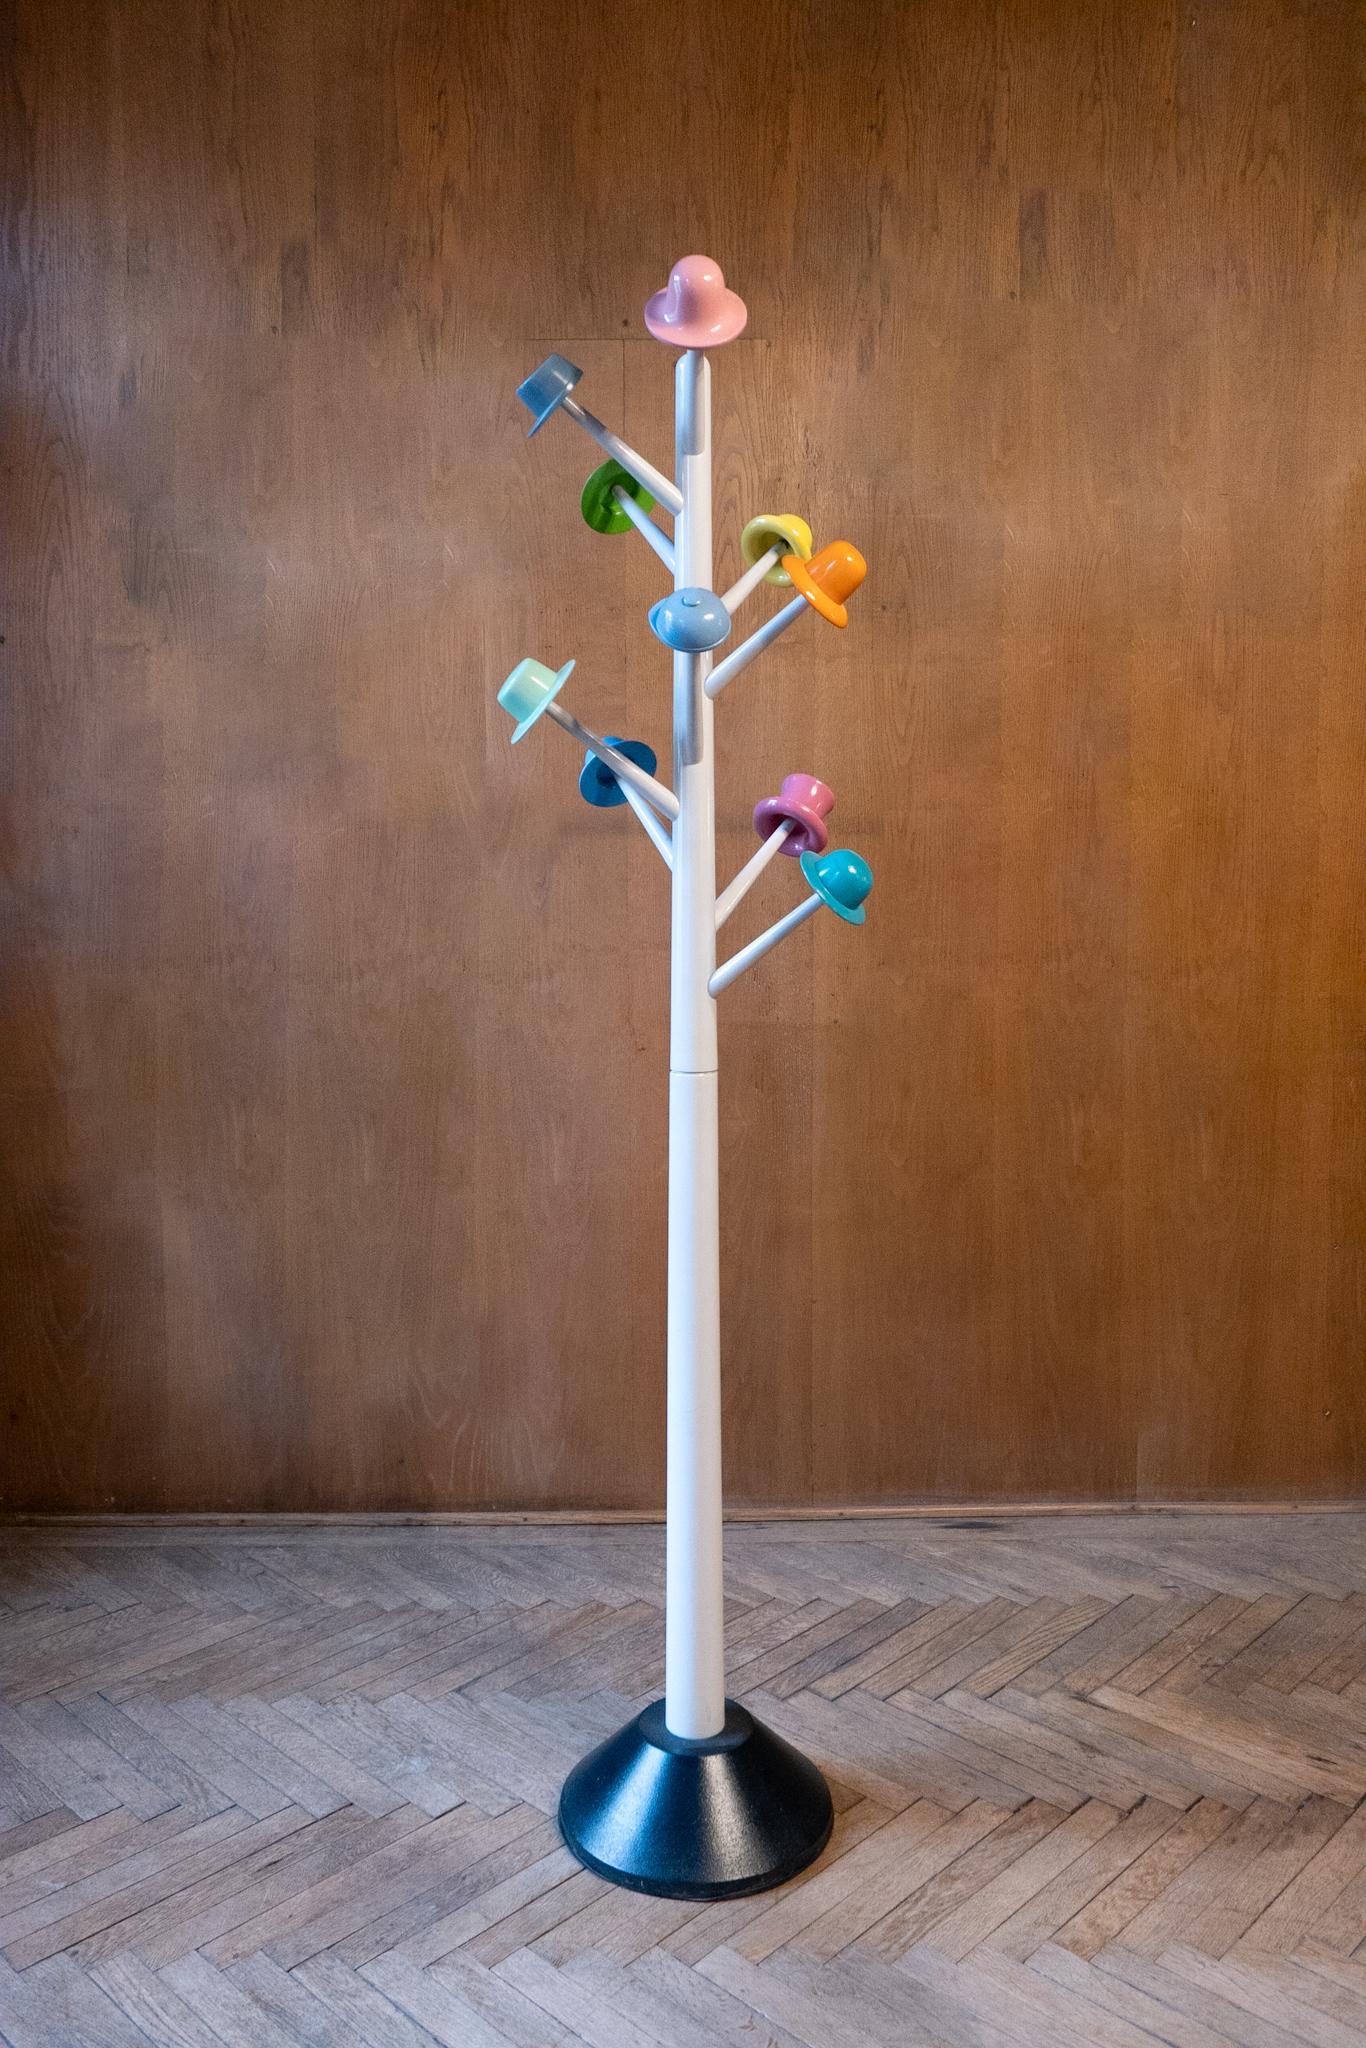 Late 20th Century Post-Modern White Metal Coat Rack with Multi-Colored Hooks by Ugo Nespolo, 1980s